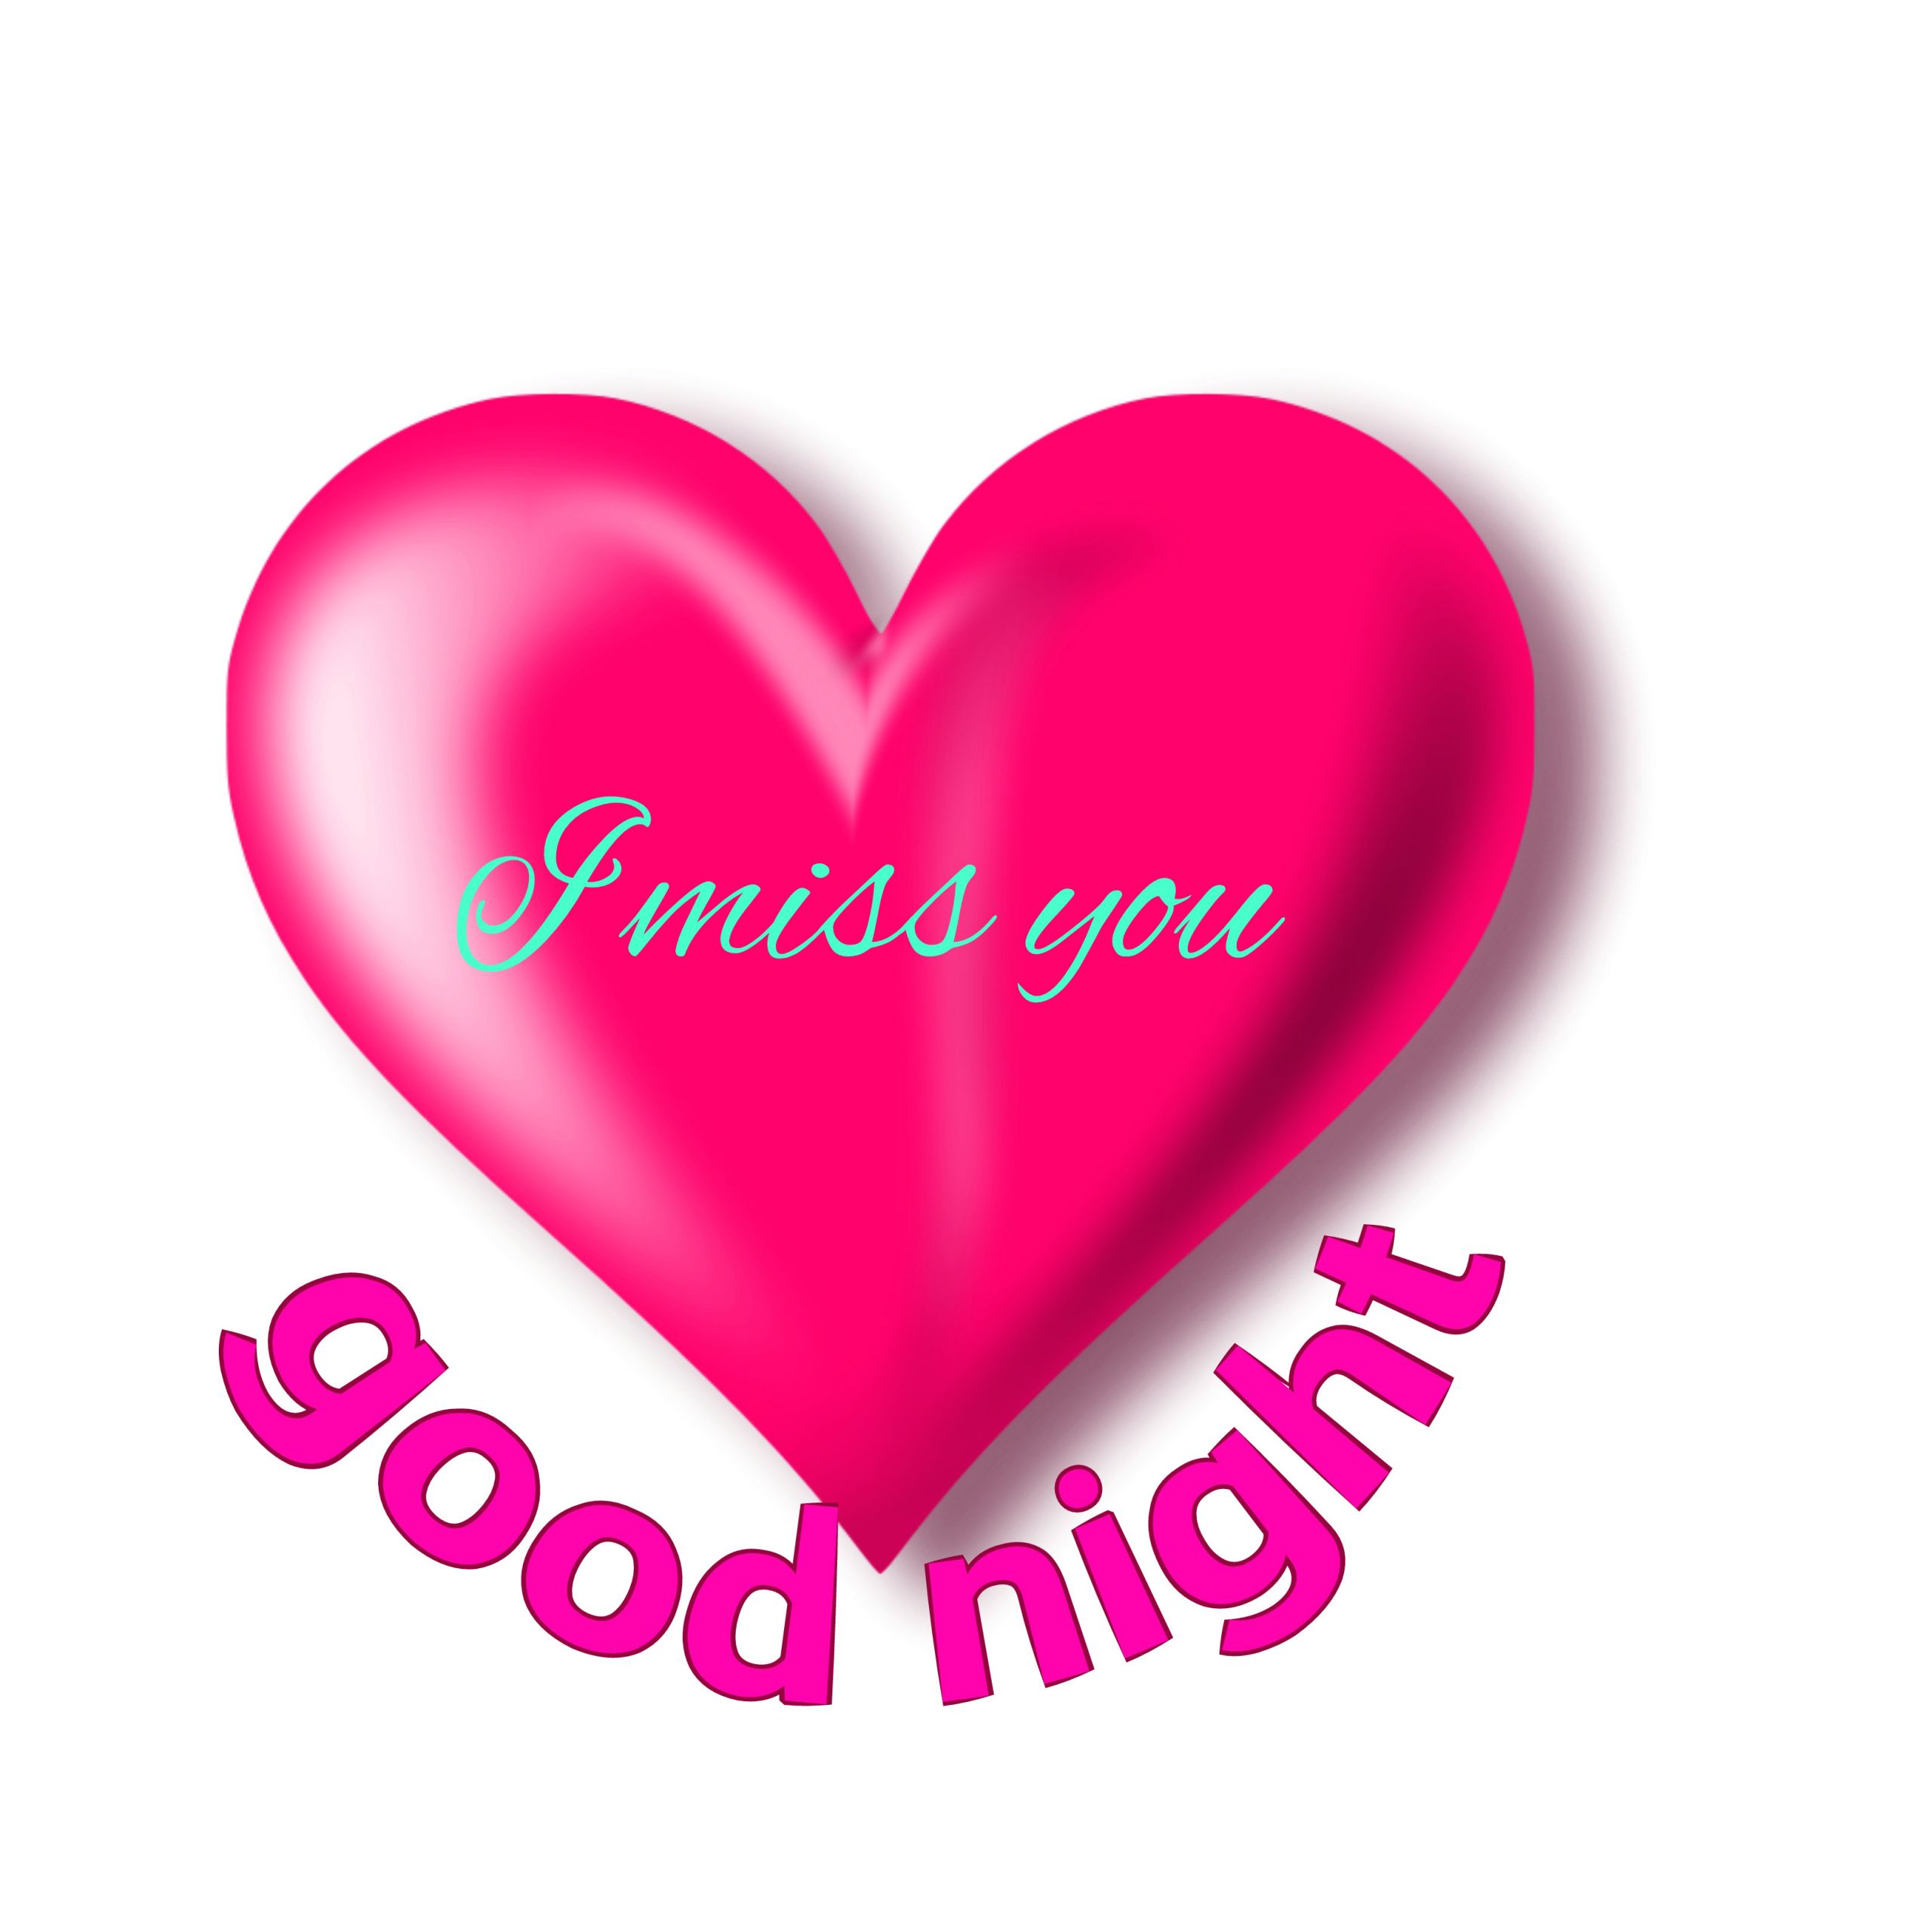 good night i love you wallpapers wallpaper cave jpg